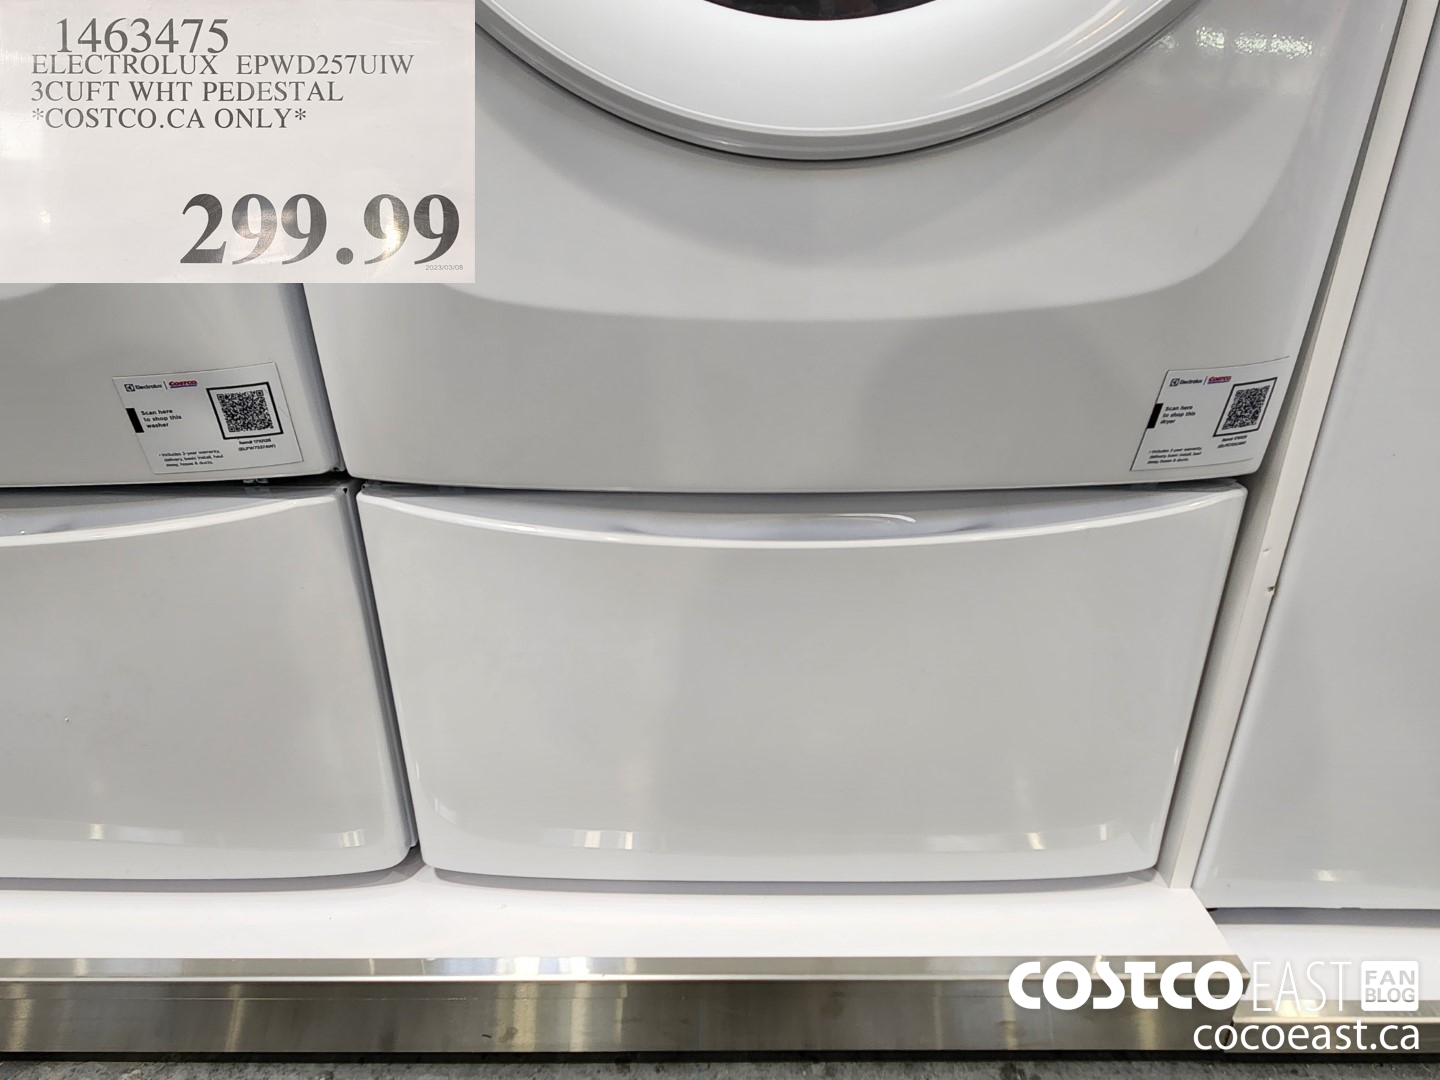 https://east.cocowest1.ca/2023/03/ELECTROLUX_EPWD257UIW_3CUFT_WHT_PEDESTAL_COSTCOCA_ONLY_20230315_72470.jpg